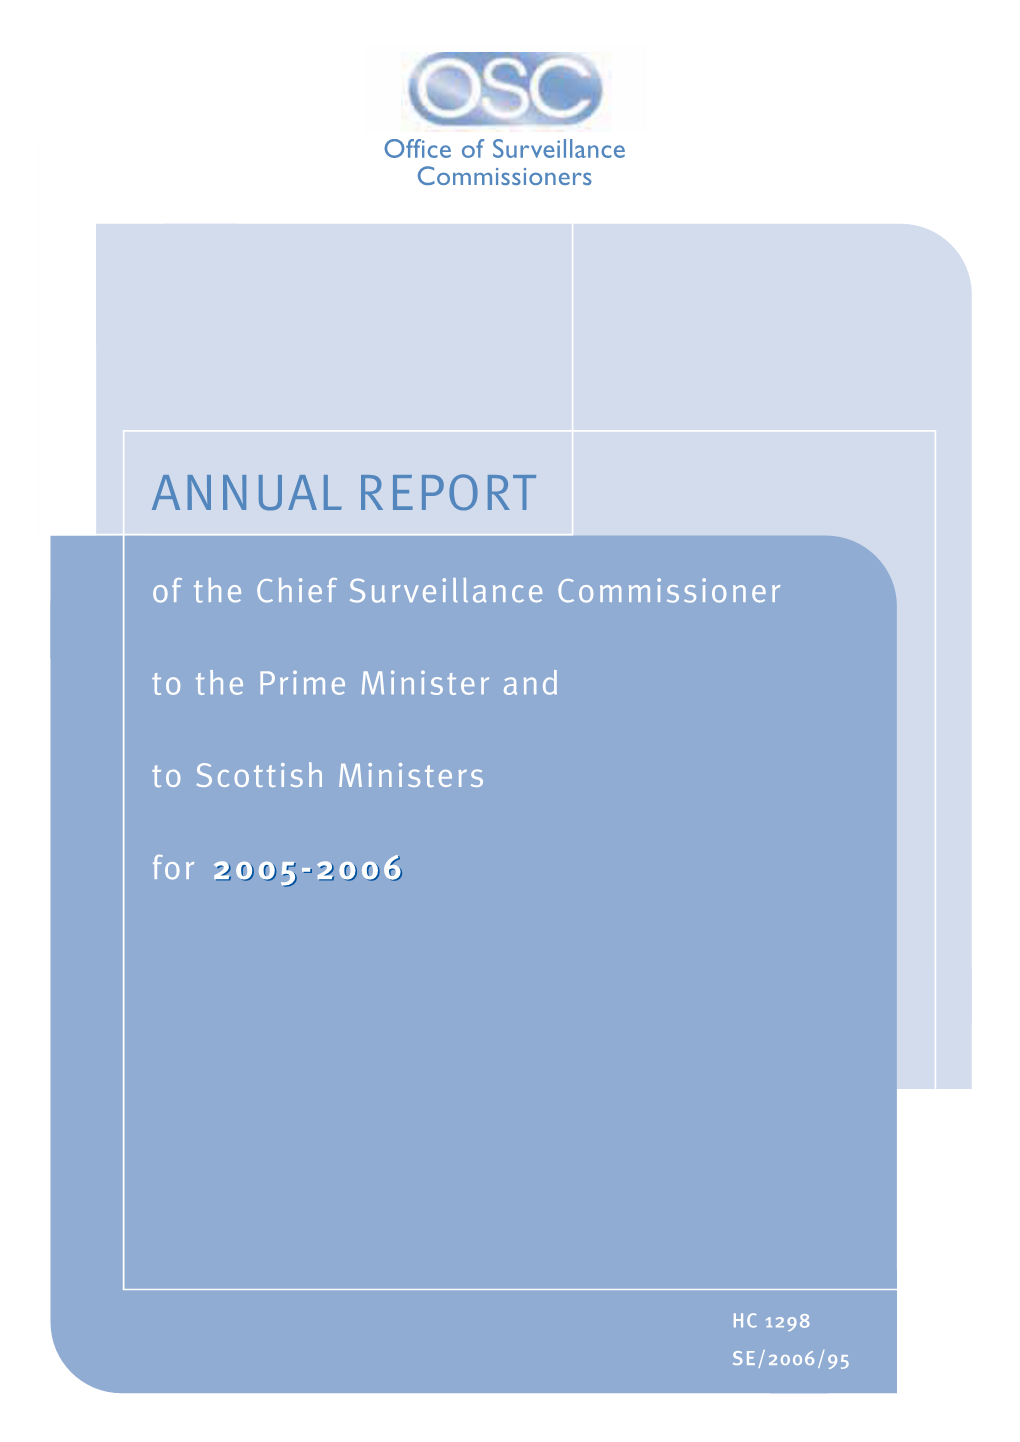 ANNUAL REPORT of the Chief Surveillance Commissioner to the Prime Minister and to Scottish Ministers for 2005-2006